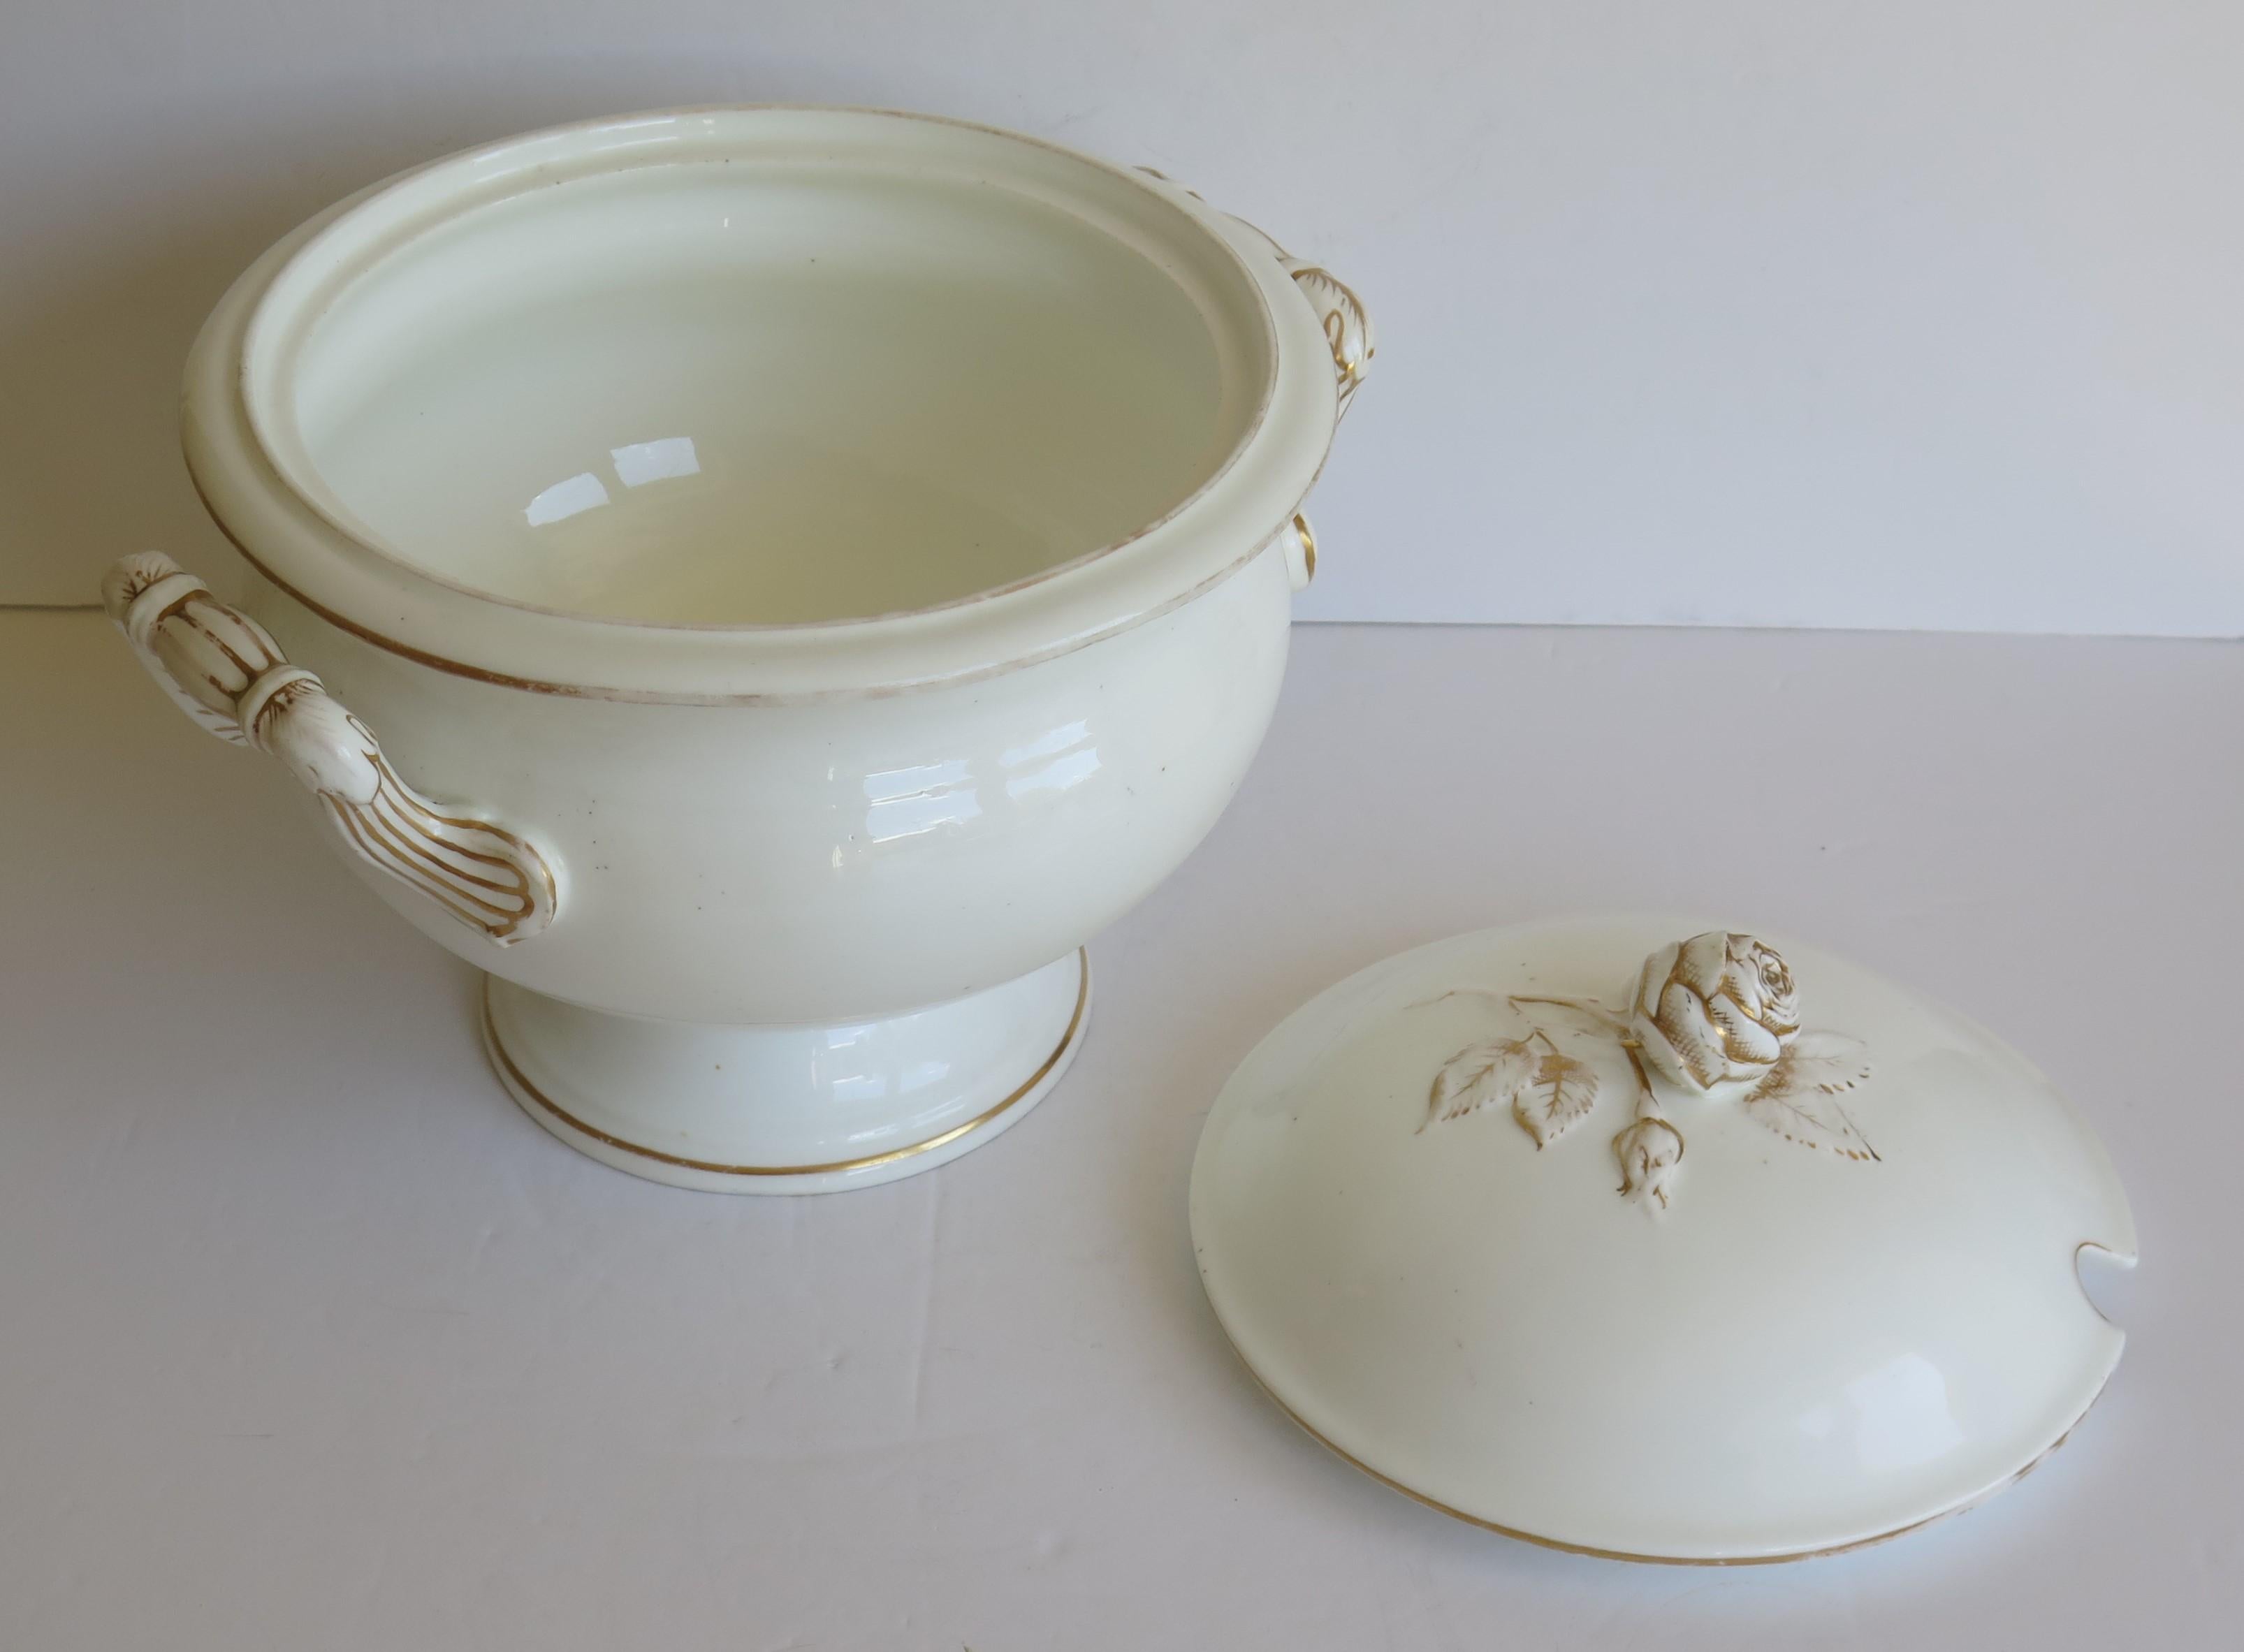 Large 19th Century Porcelain Tureen Gilded Moulded Handles & Rose Knop to Lid For Sale 5